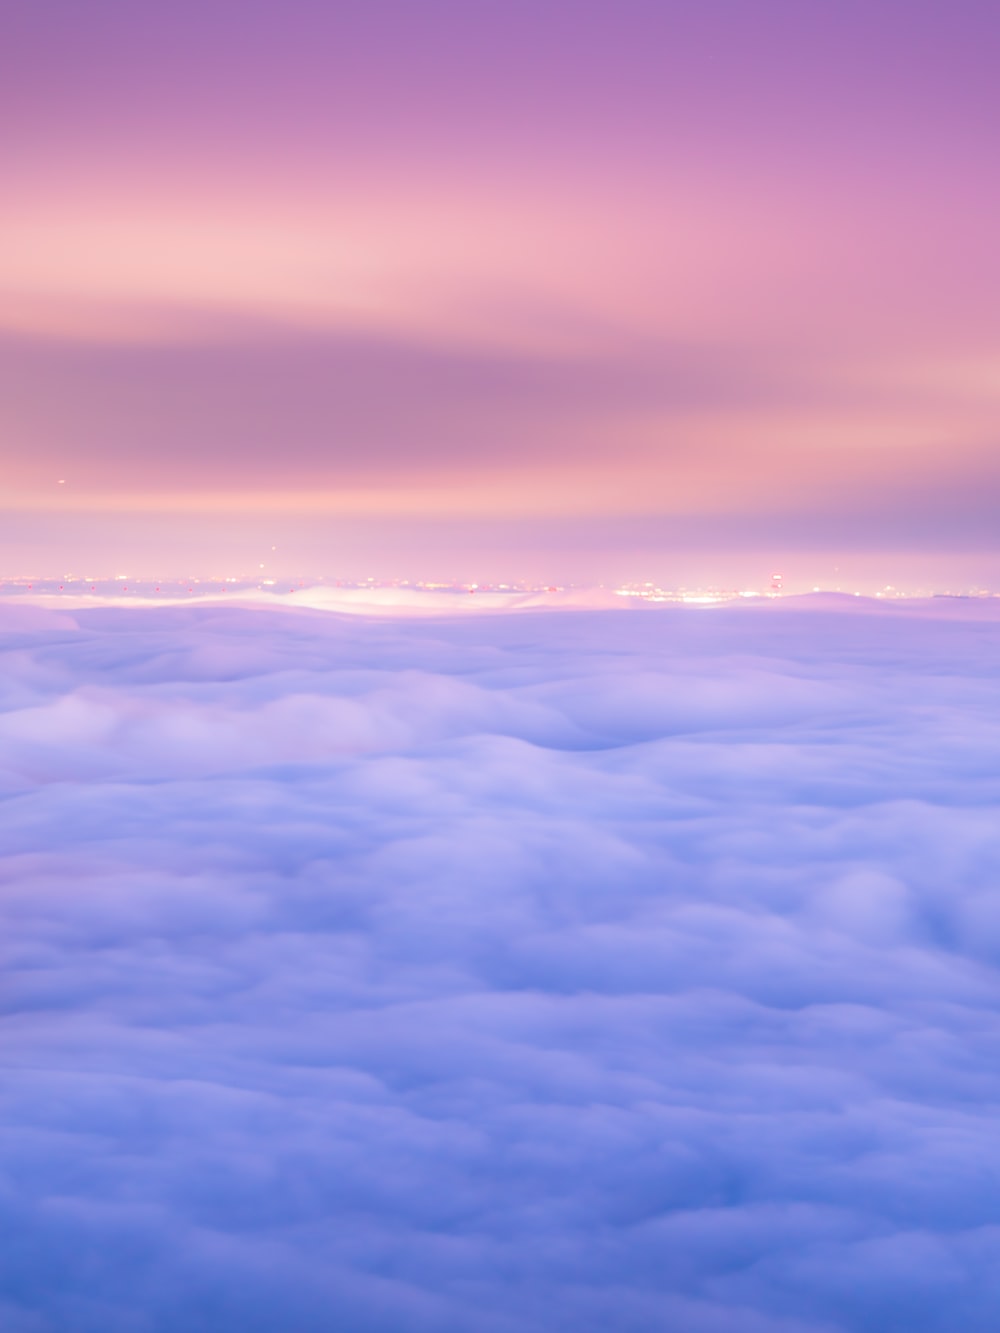 Sea Of Clouds Picture. Download Free Image